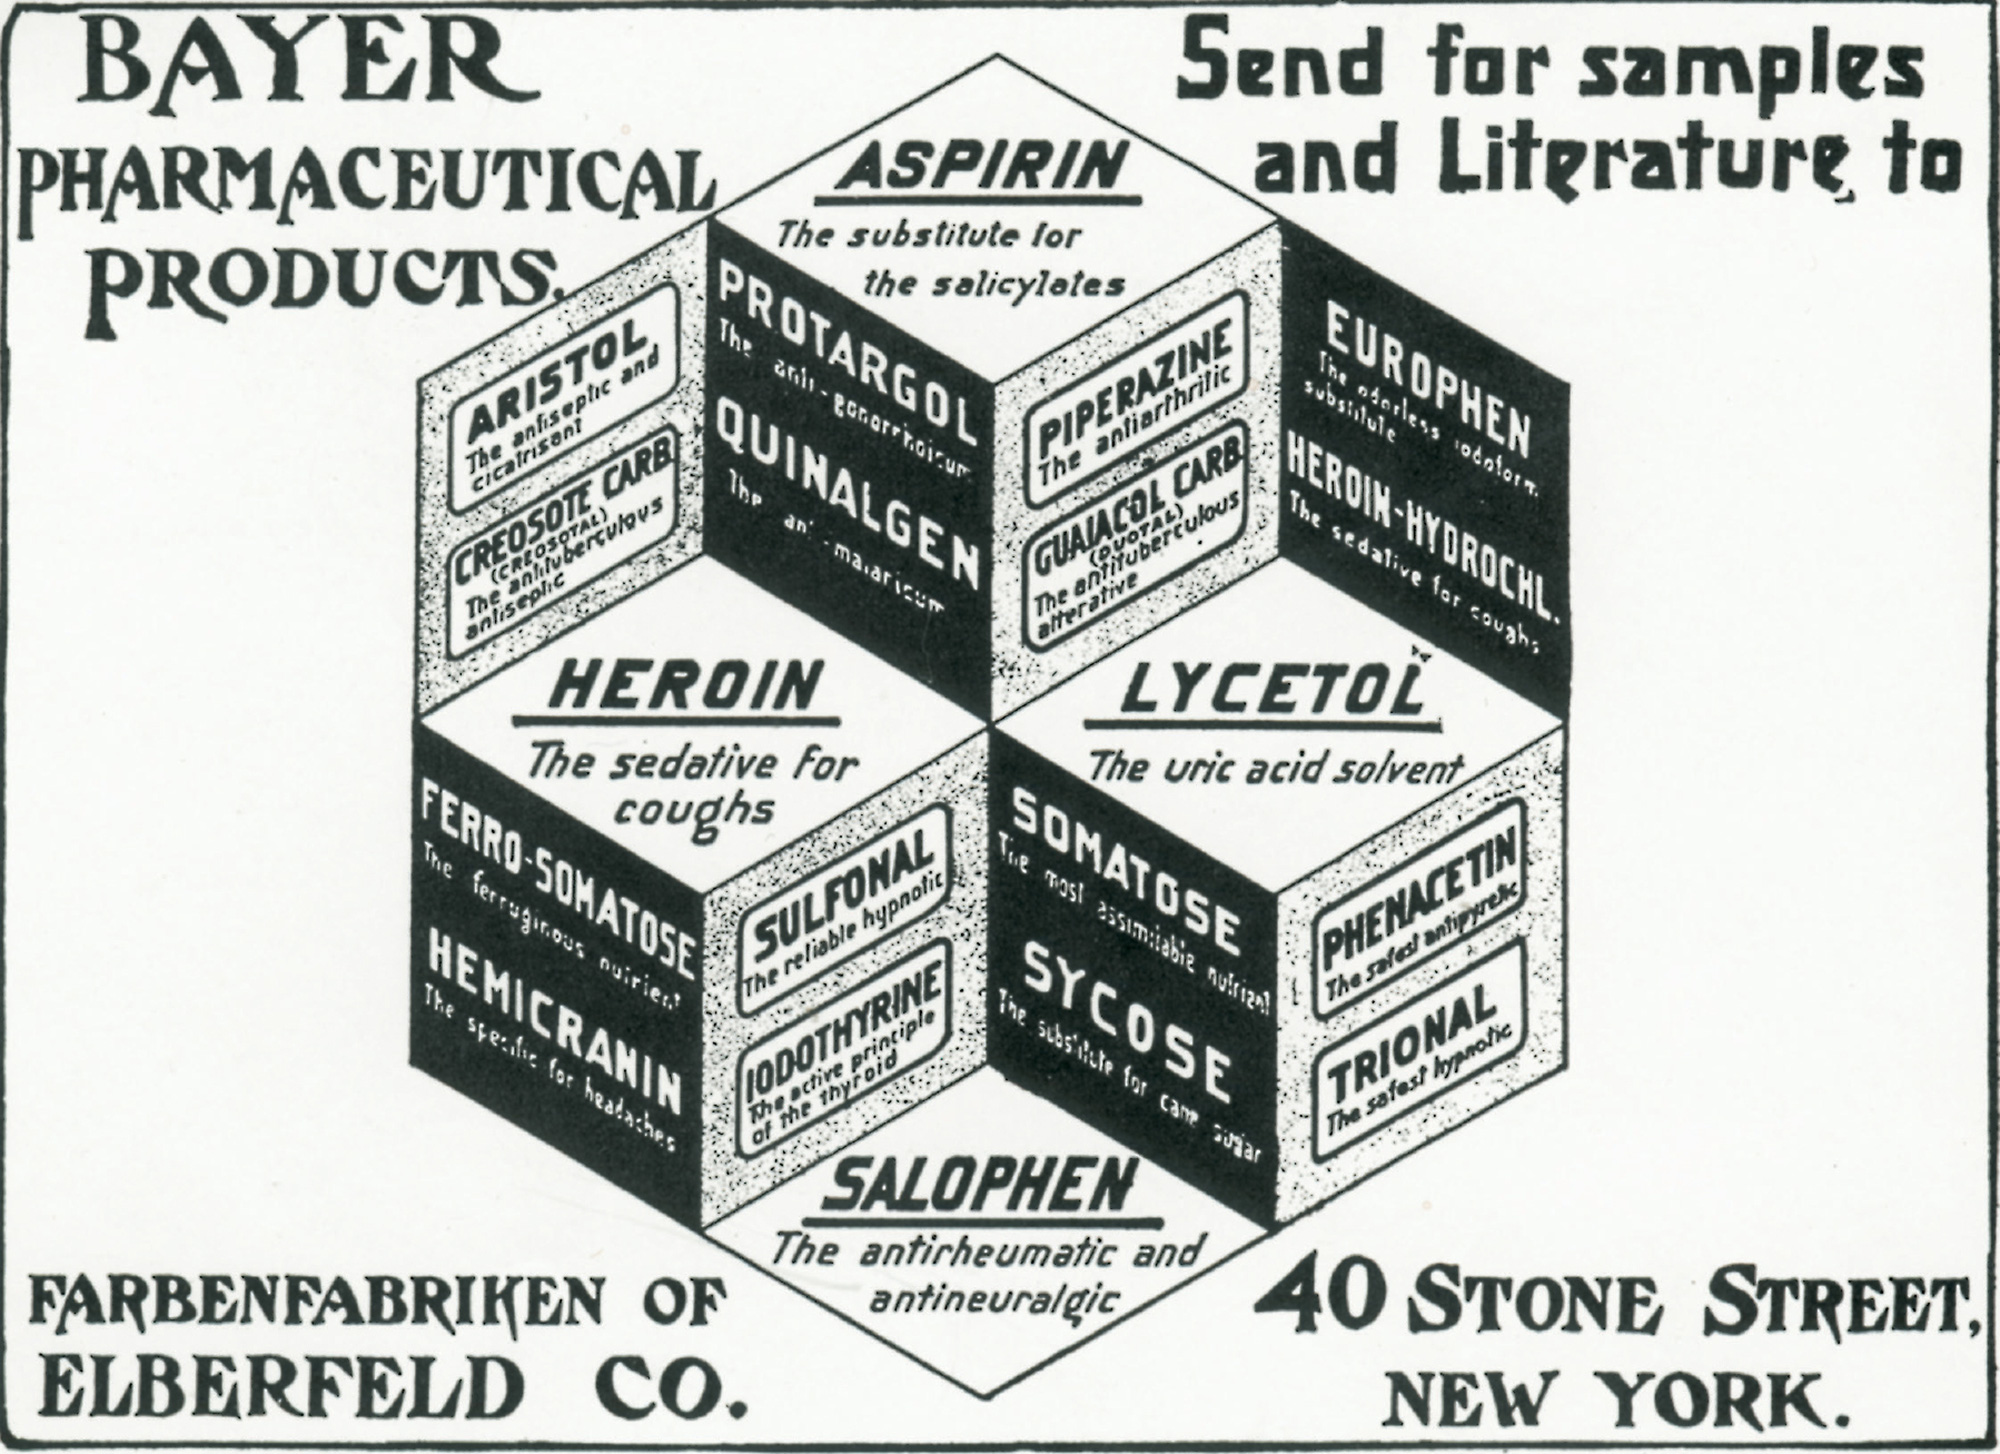 A leaflet sent by Bayer to physicians promoting both aspirin and heroin. The two substances were synthesized within two weeks of each other by Bayer’s Felix Hoffman in August 1897. As shown in the leaflet, heroin was initiallly marketed to suppress coughs, and was also prescribed to relieve the pain of childbirth. It was banned in most countries in the 1930s.